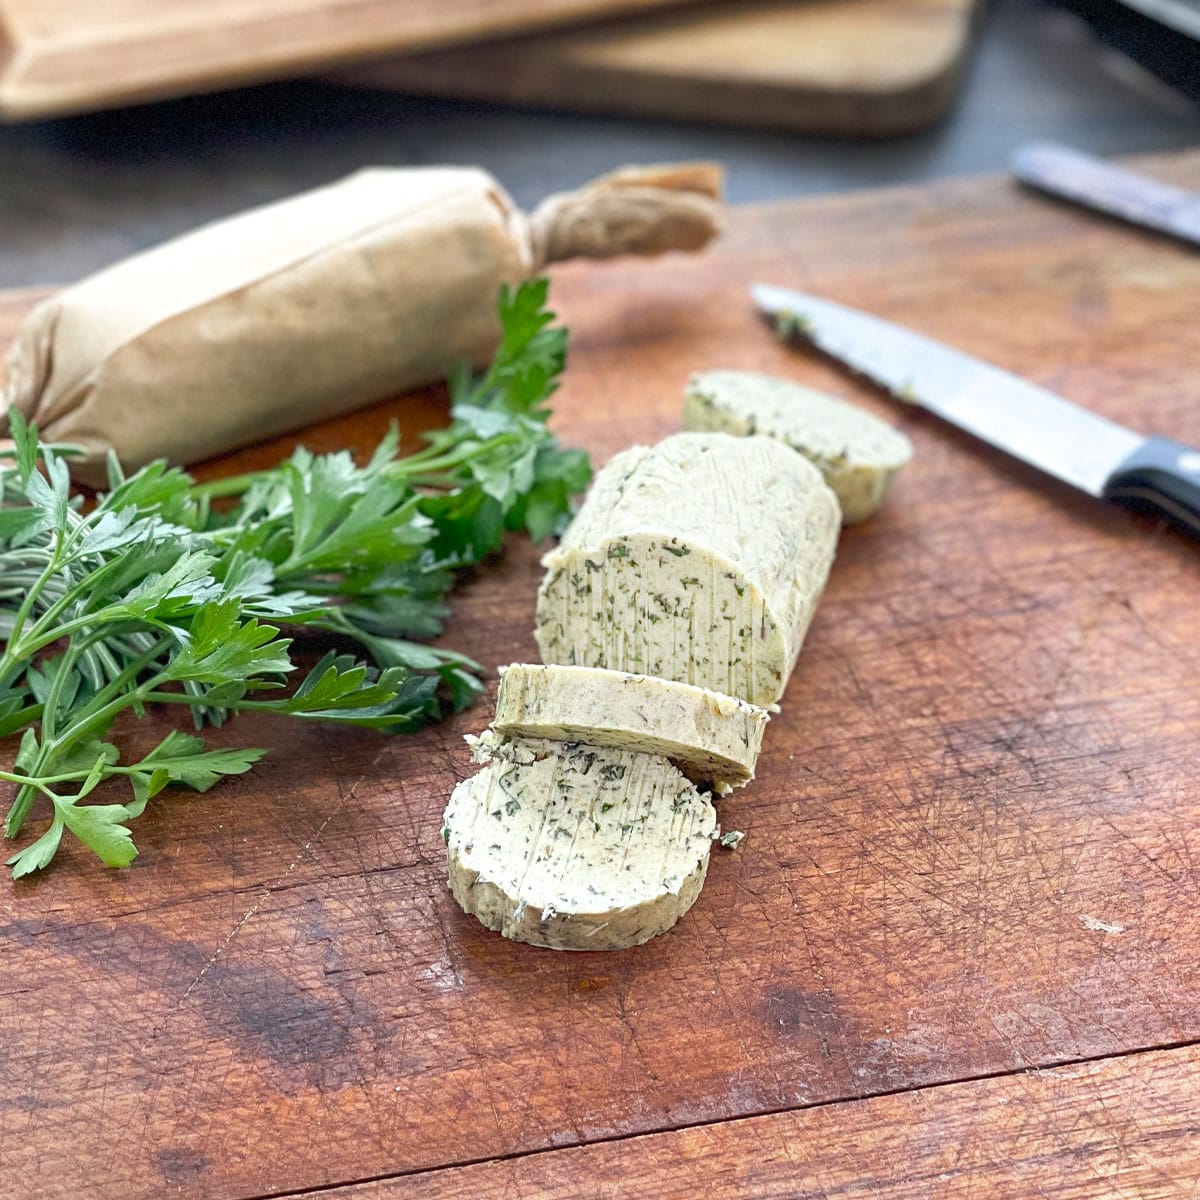 Log of compound butter for turkey on a wooden cutting board next to fresh parsley.